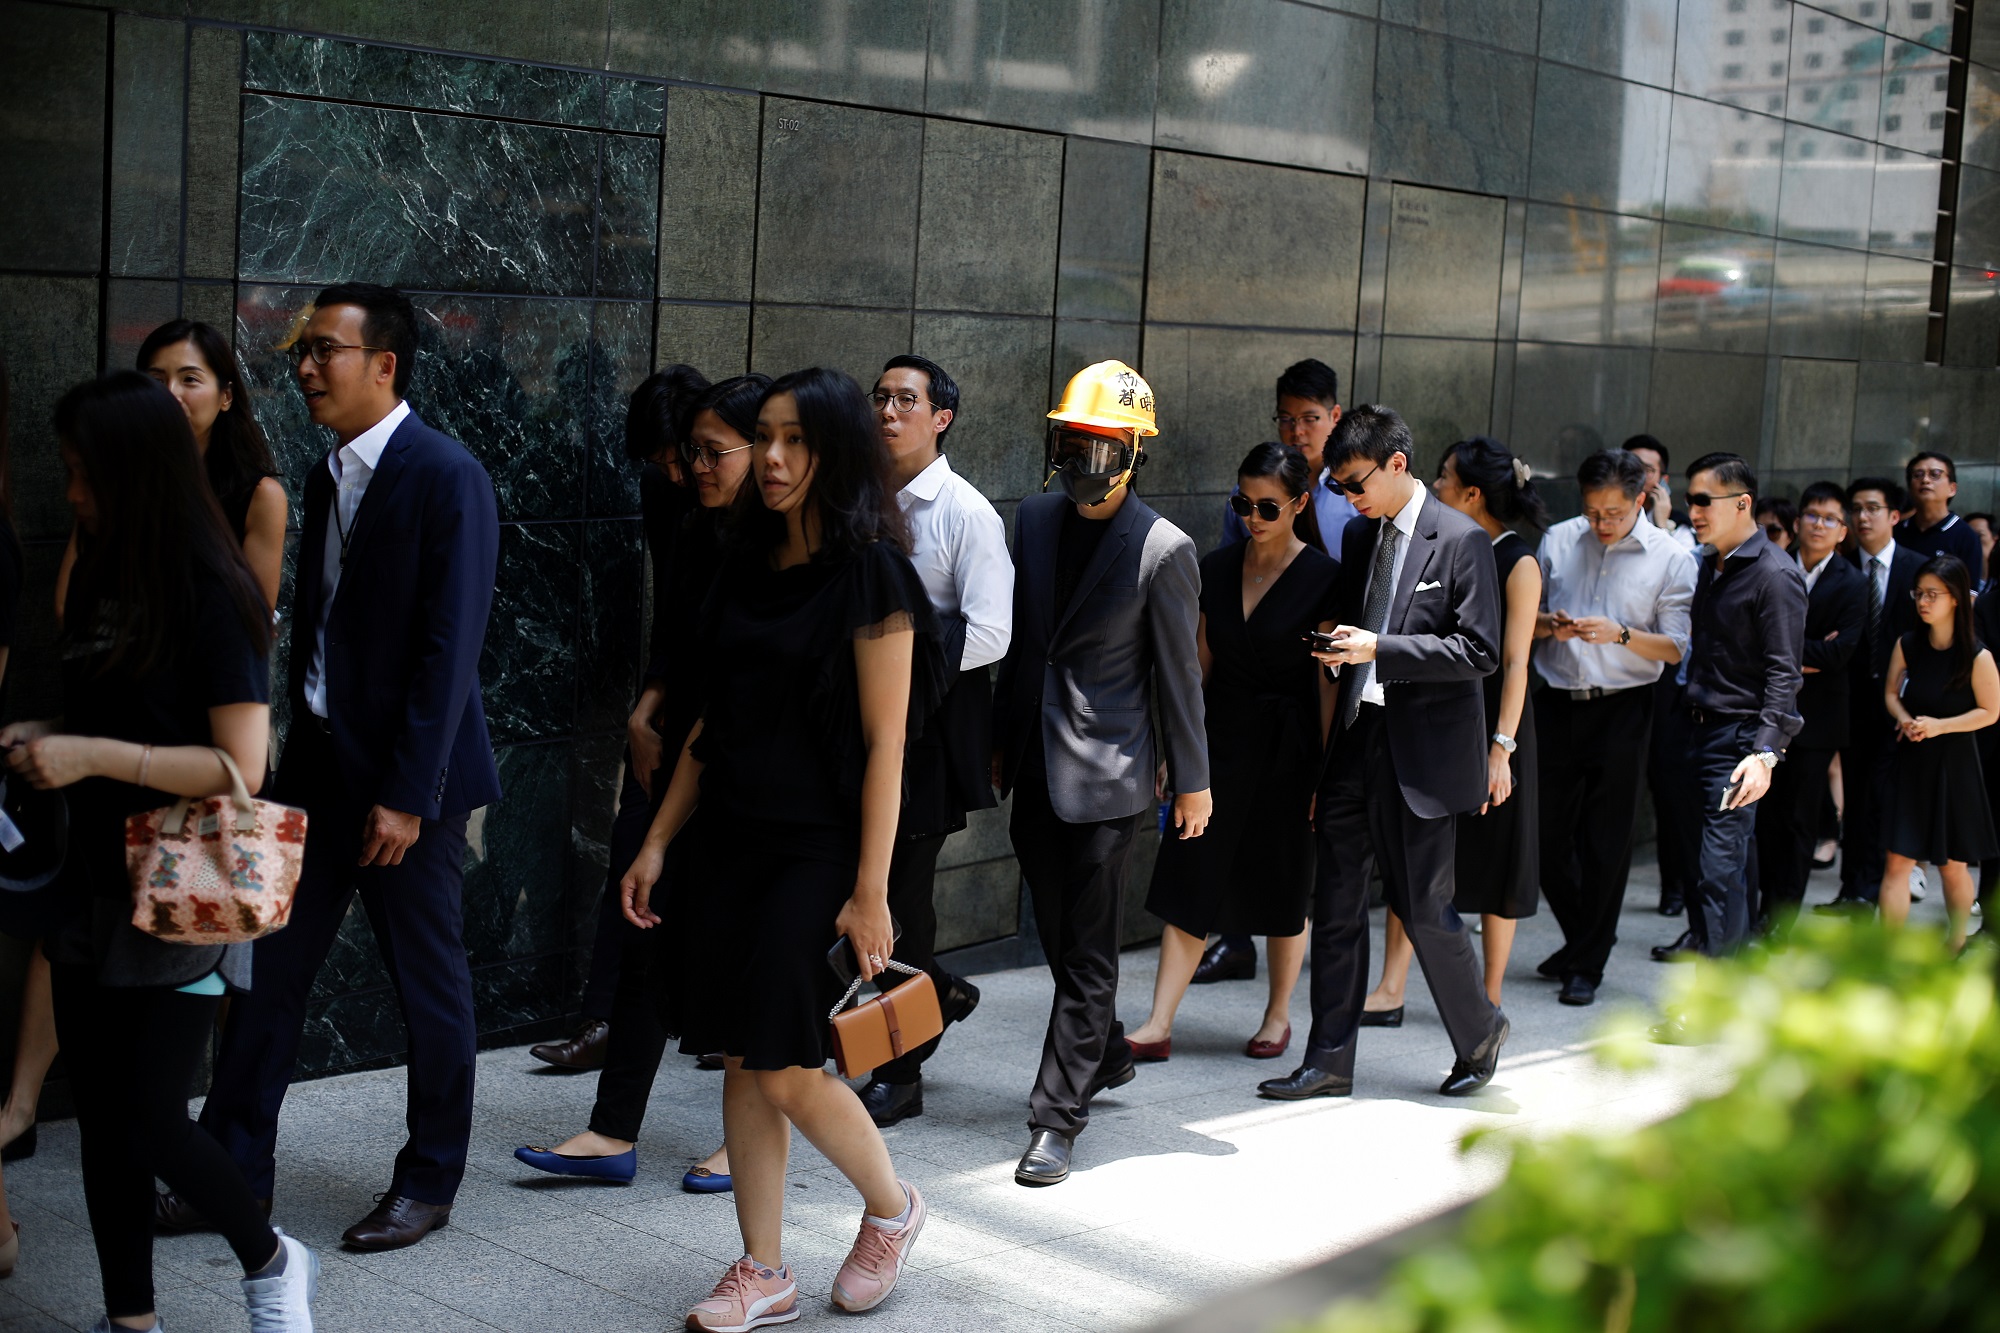 Lawyers and workers in Hong Kong's legal sector walk during a silent protest march to the Department of Justice in Hong Kong, China August 7, 2019. REUTERS/Thomas Peter